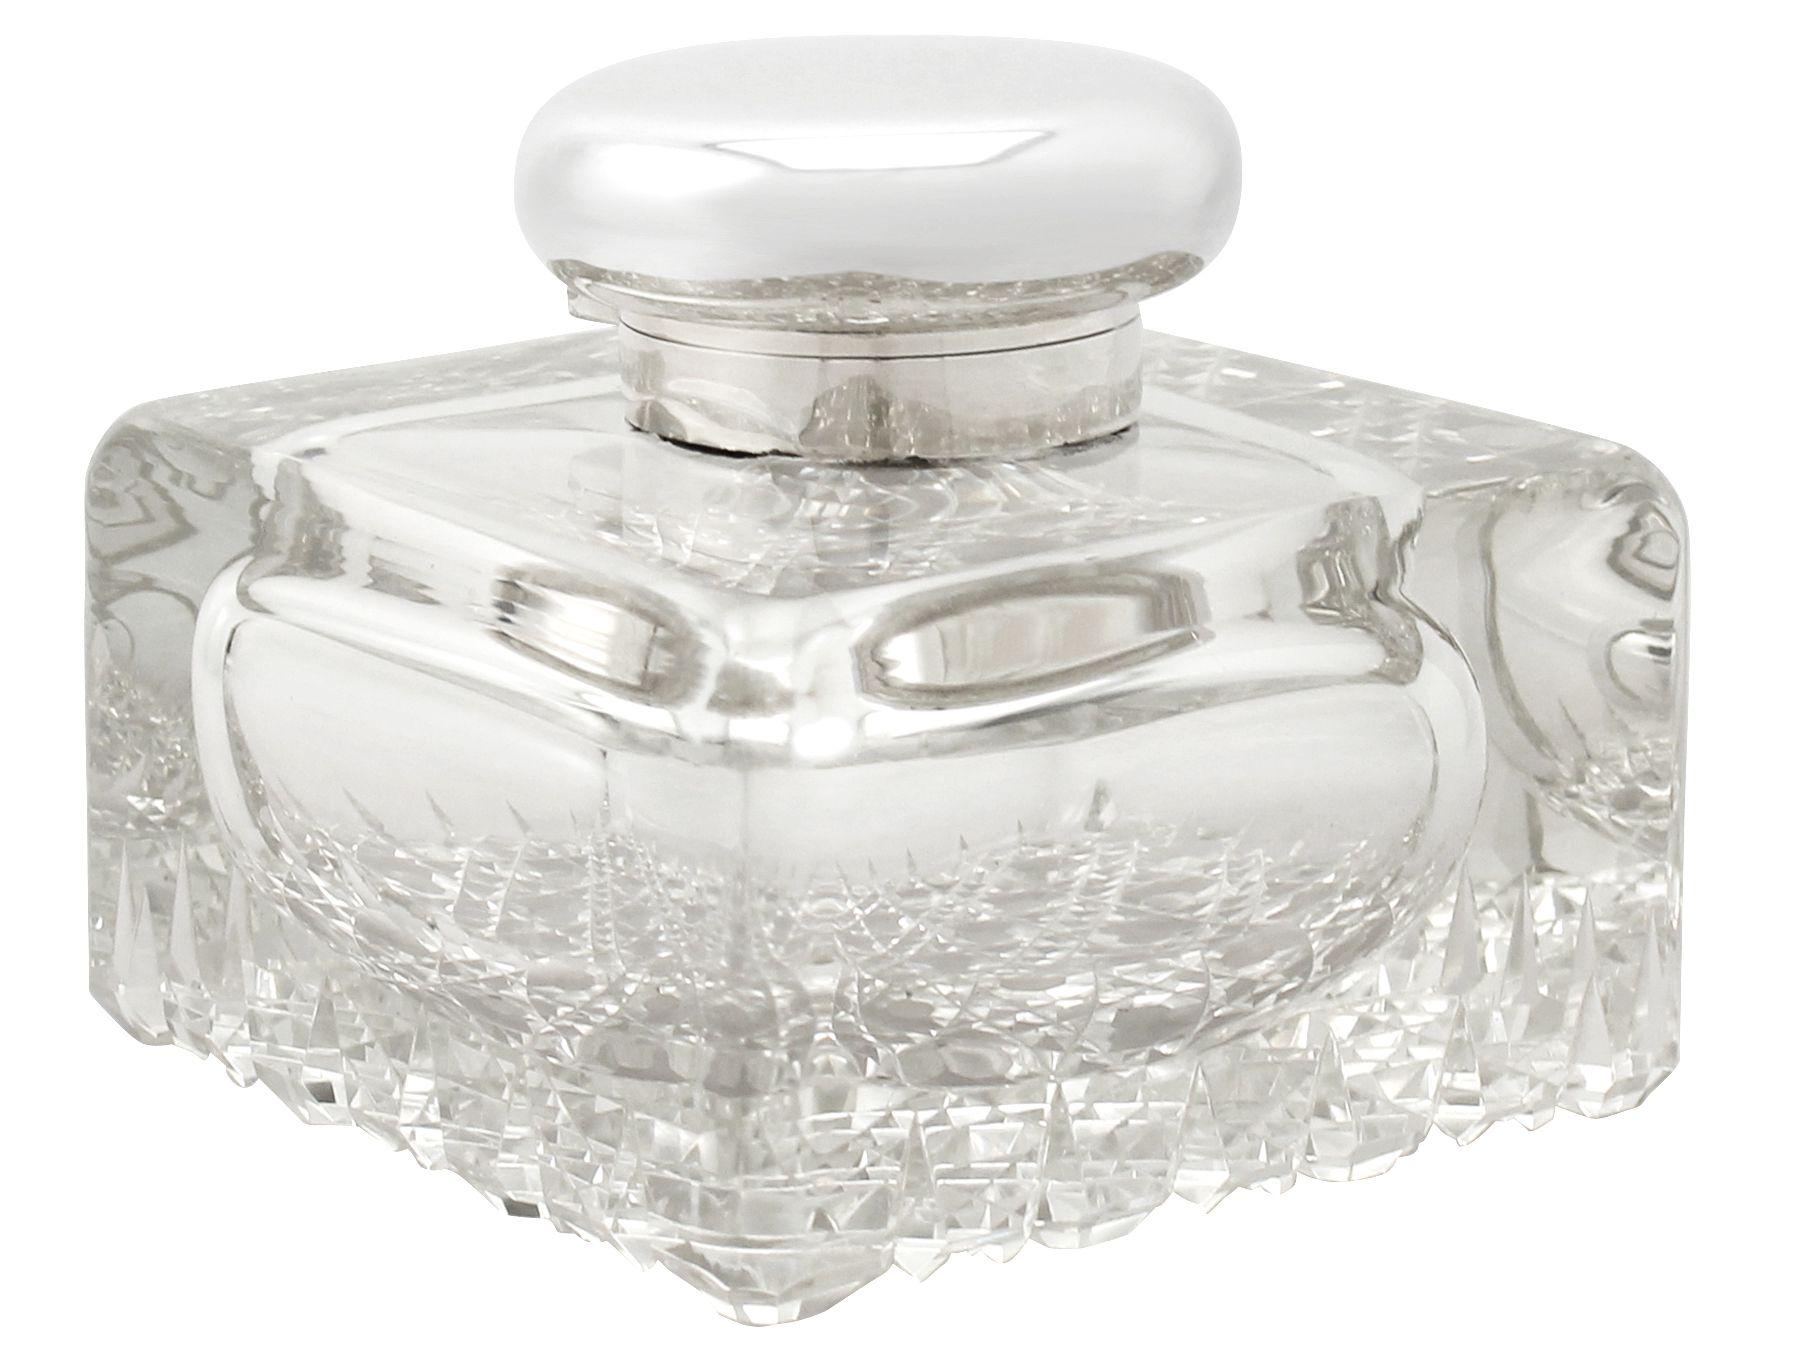 An exceptional, fine and impressive, large antique George V cut-glass and English sterling silver mounted desk inkwell made by Asprey & Co; part of our antique silver and glassware collection.

This fine antique George V cut glass and English